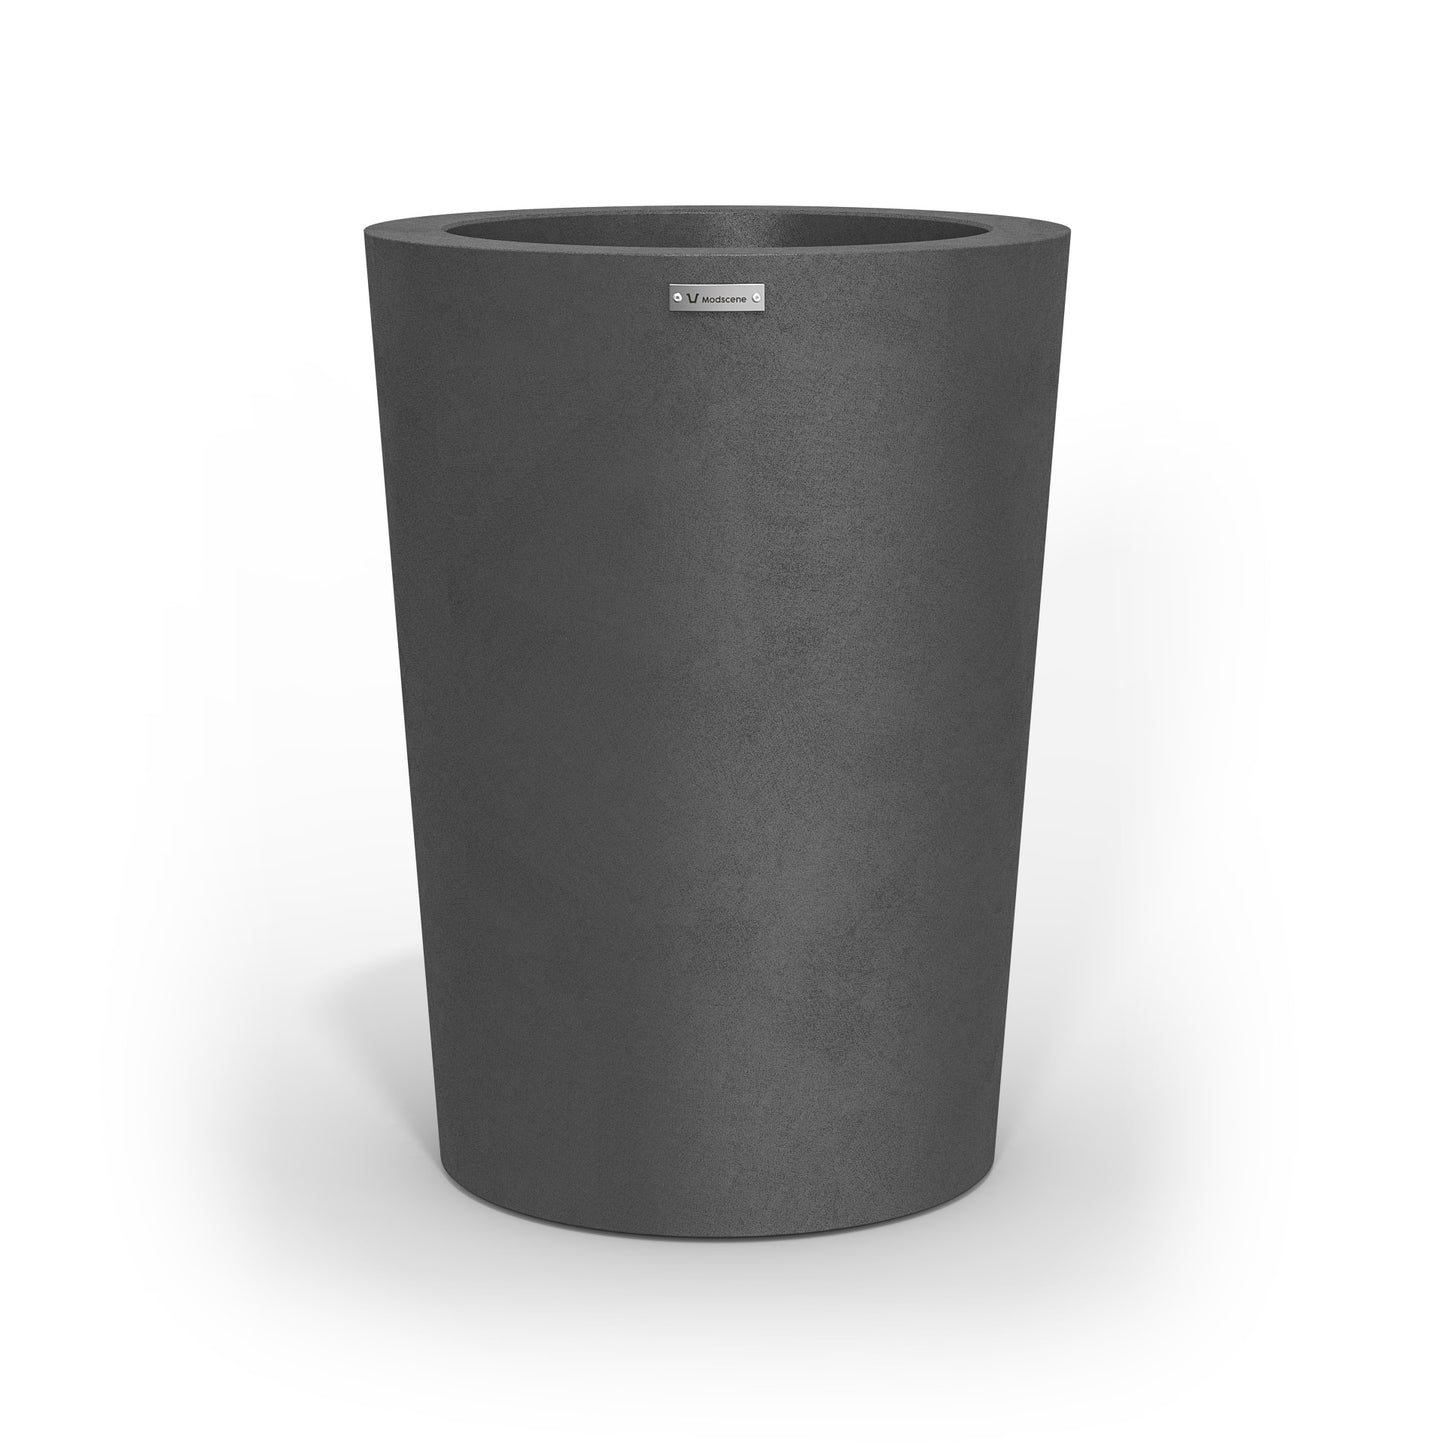 A modern style planter pot in a brushed grey colour. Made by Modscene NZ.